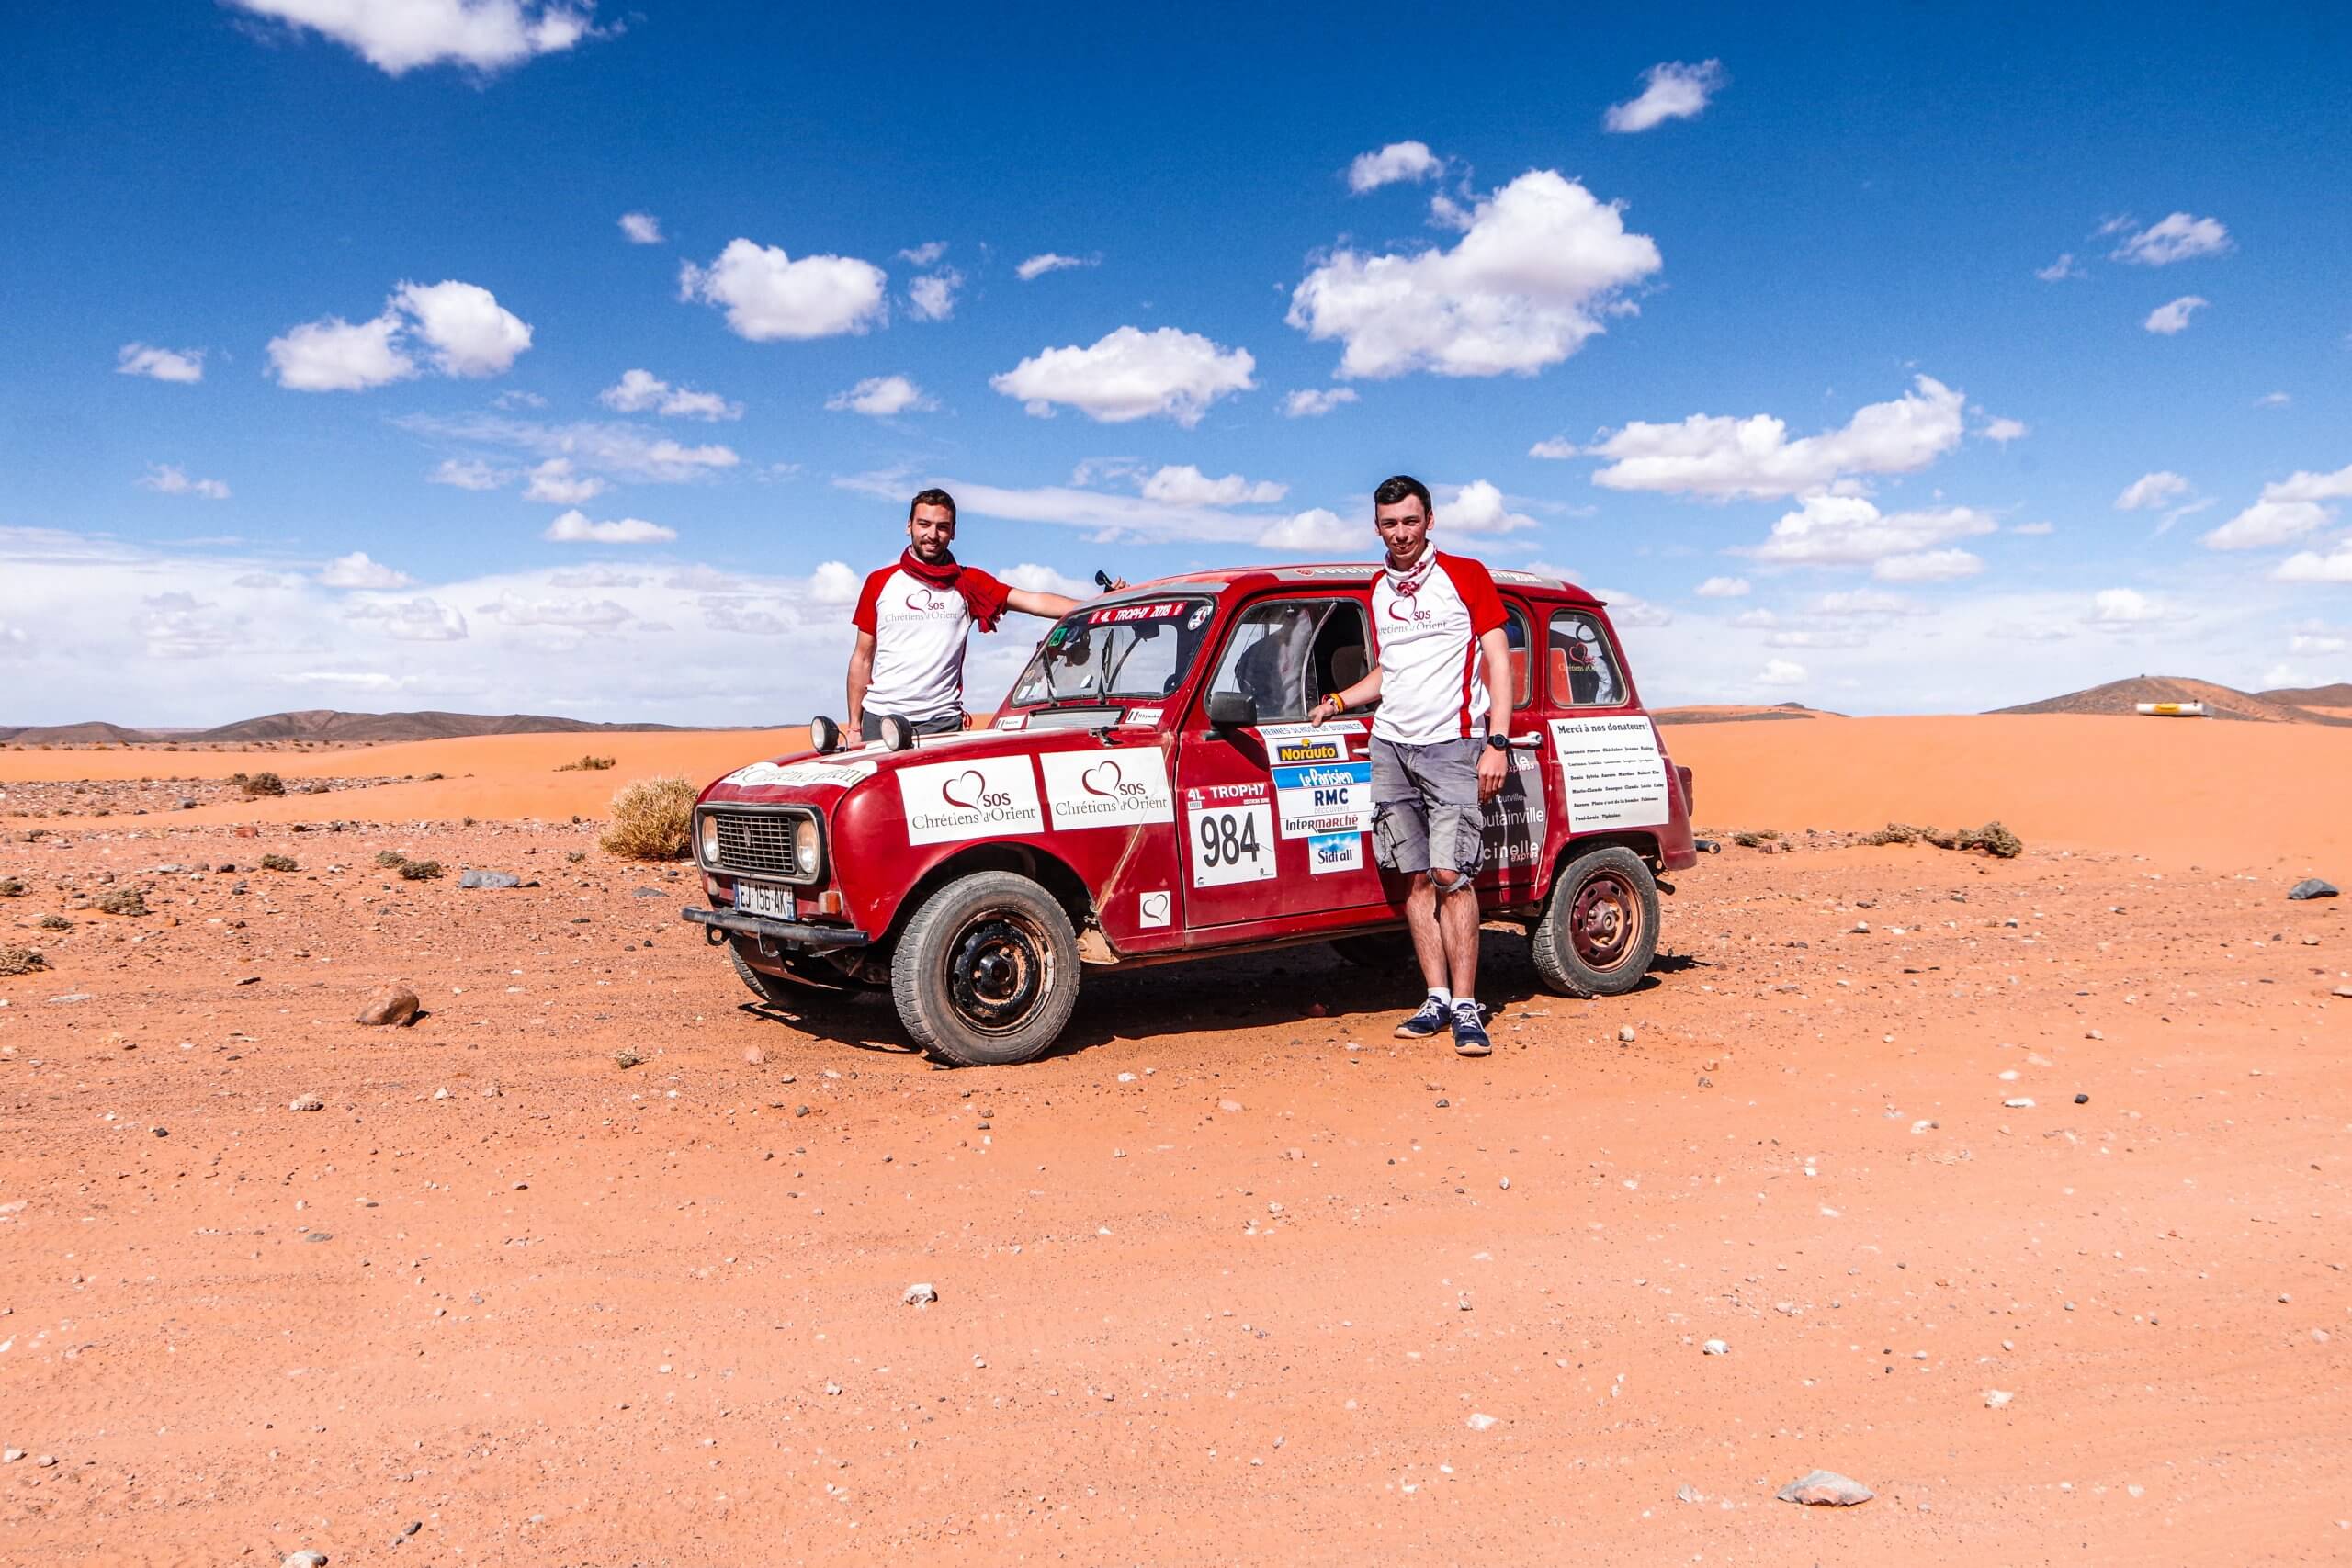 Crew 984 carries the colours of SOS Chrétiens d'Orient to the 4L Trophy, a solidarity rally in the desert of Morocco.